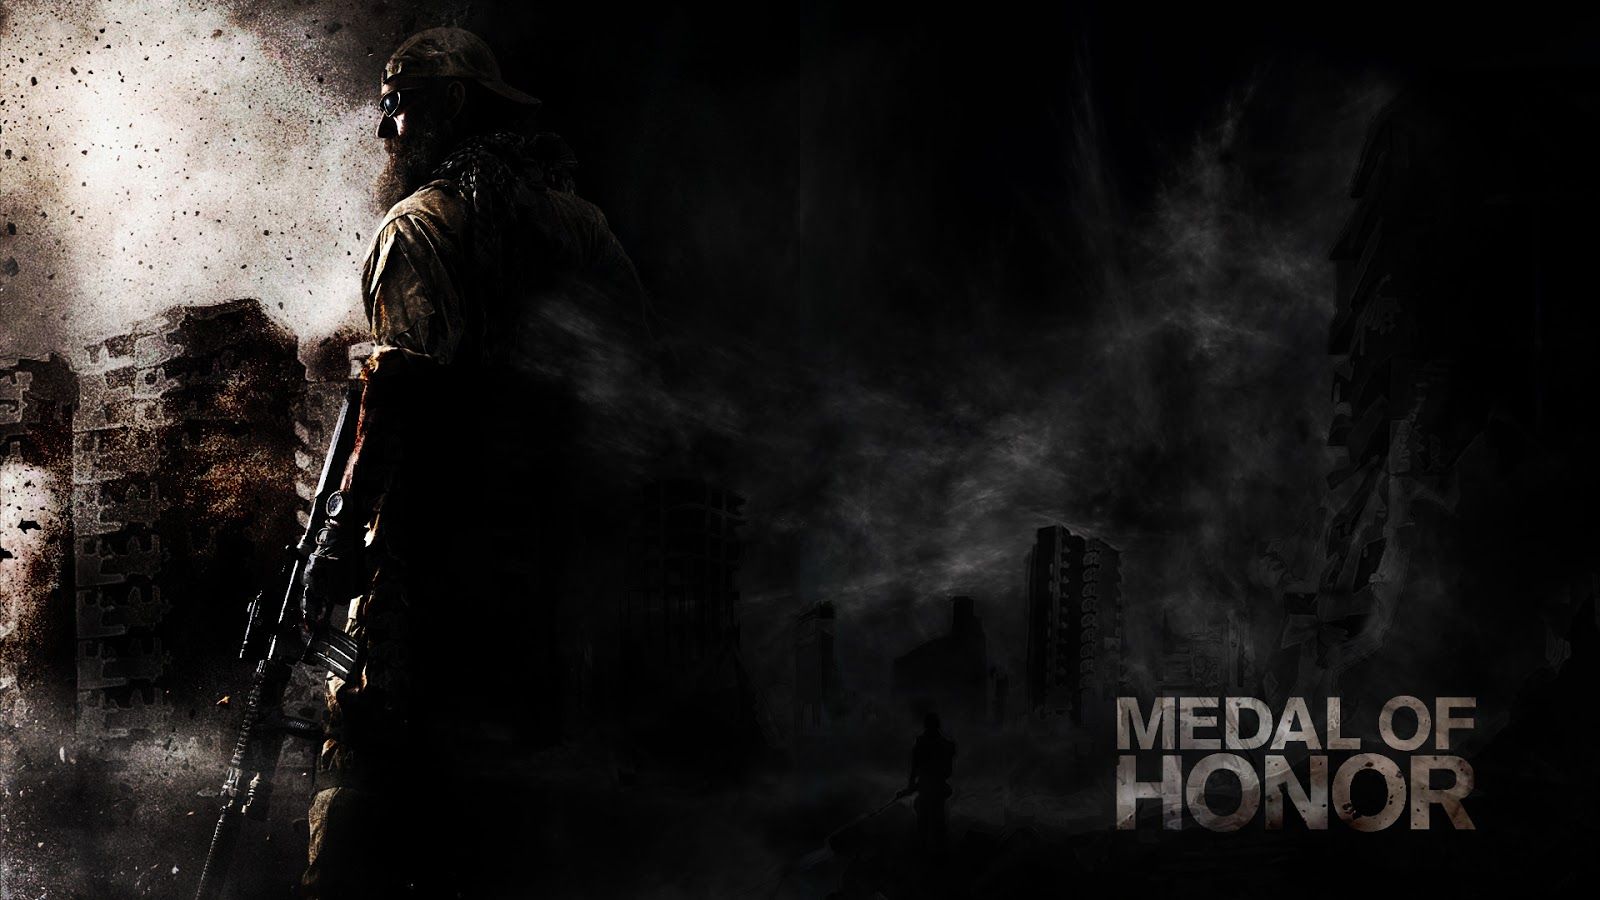 Medal of Honor Background. Medal of Honor Warfighter Wallpaper, Medal of Honor Wallpaper and Congressional Medal of Honor Wallpaper